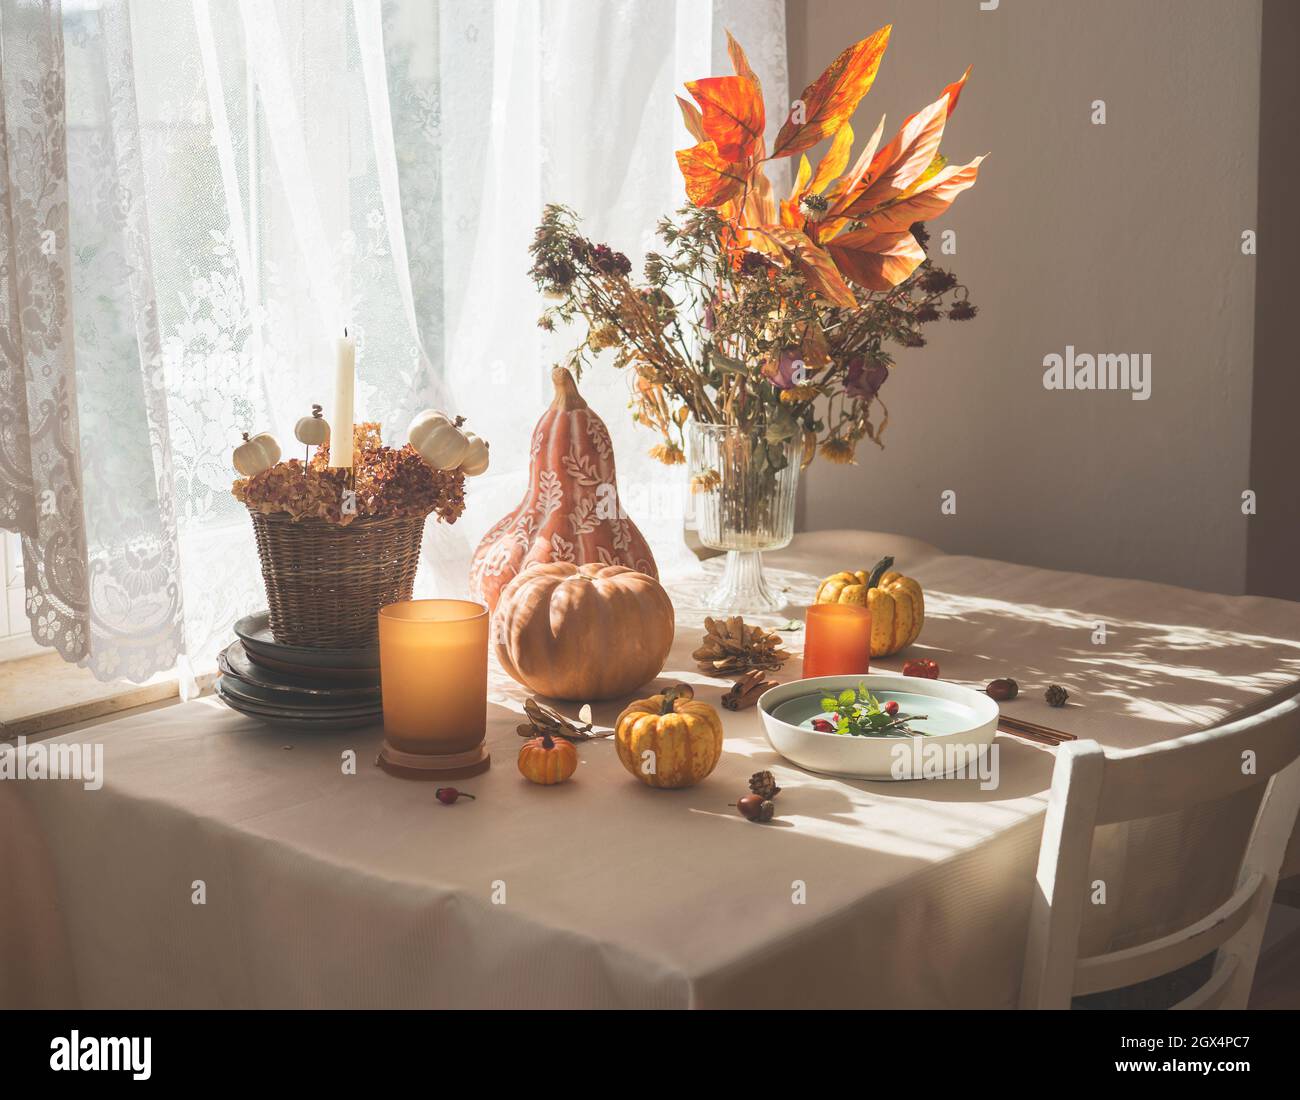 Autumnal decorated kitchen table with various pumpkins, candles, flowers and fall leaves arrangement , plate and cutlery. Morning sunlight from window Stock Photo